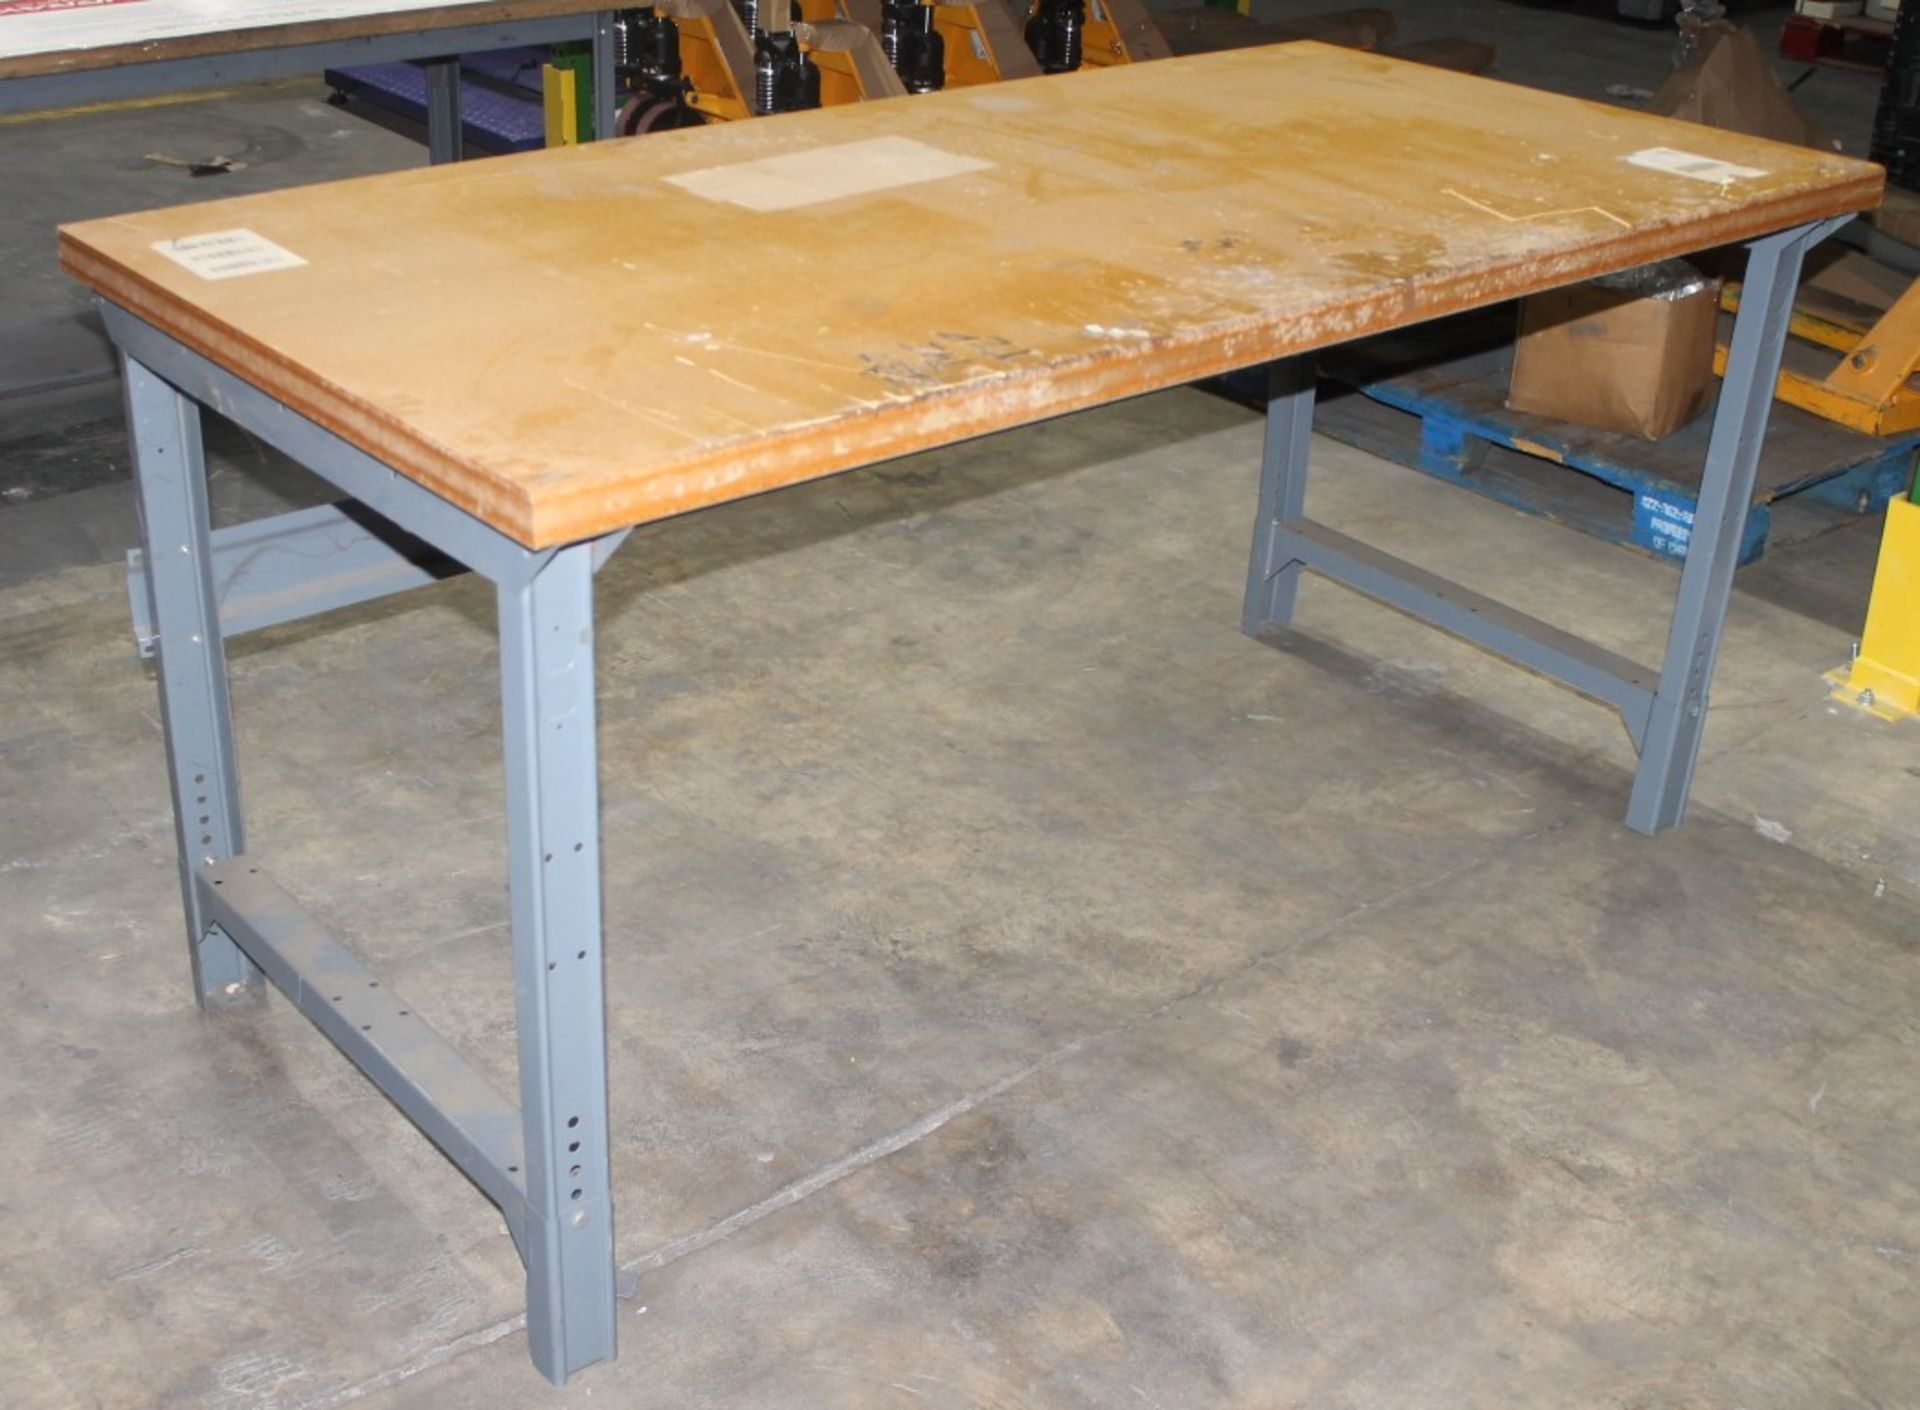 72"W X 36"D HEAVY DUTY WORK BENCH WITH 1-1/2" WOODEN TOP - Image 2 of 2